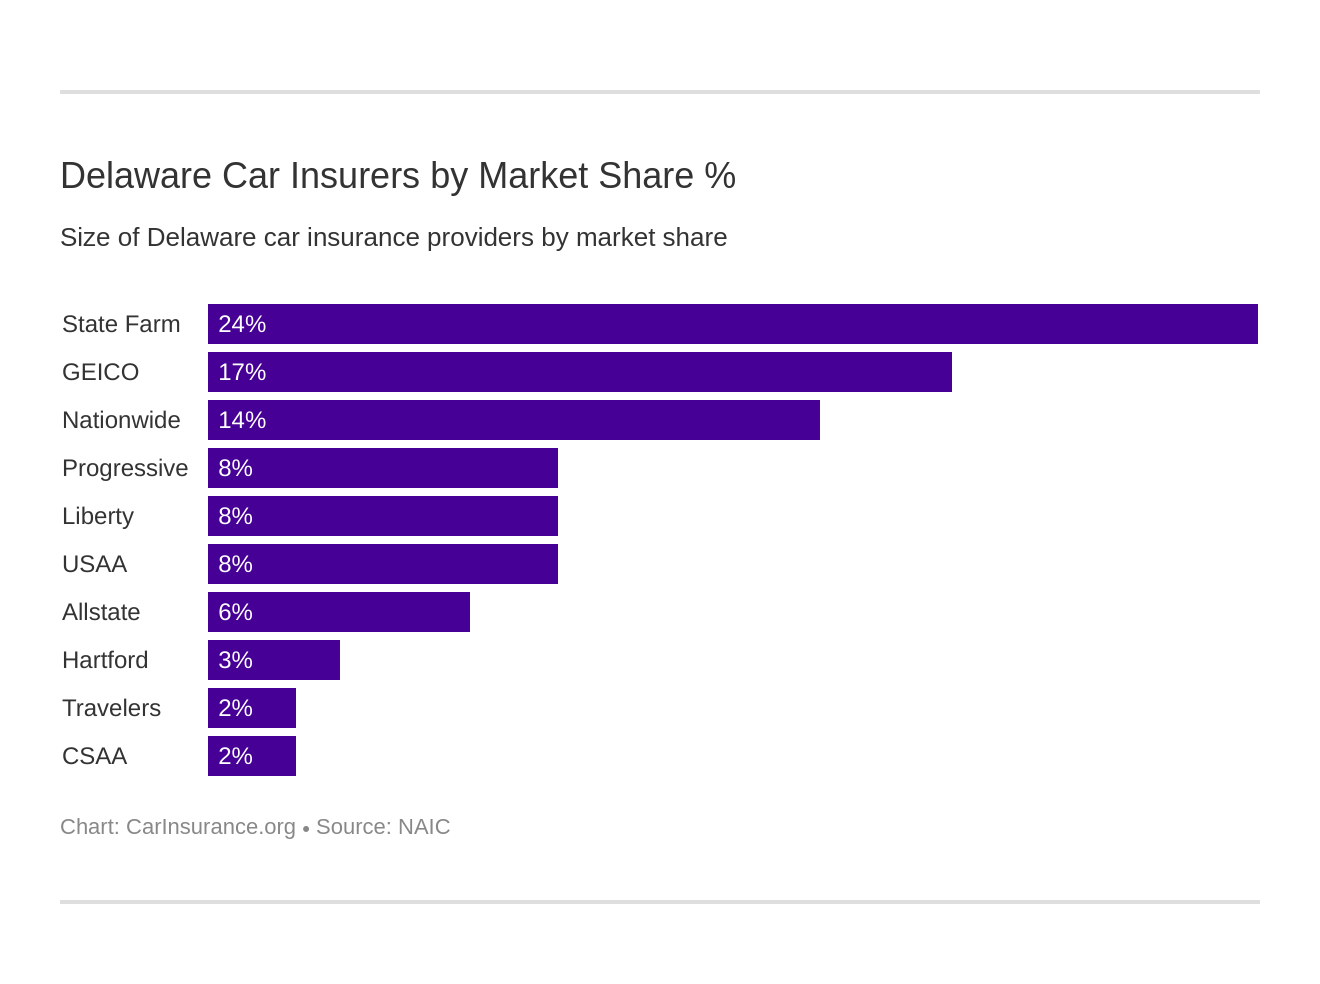 Delaware Car Insurers by Market Share %